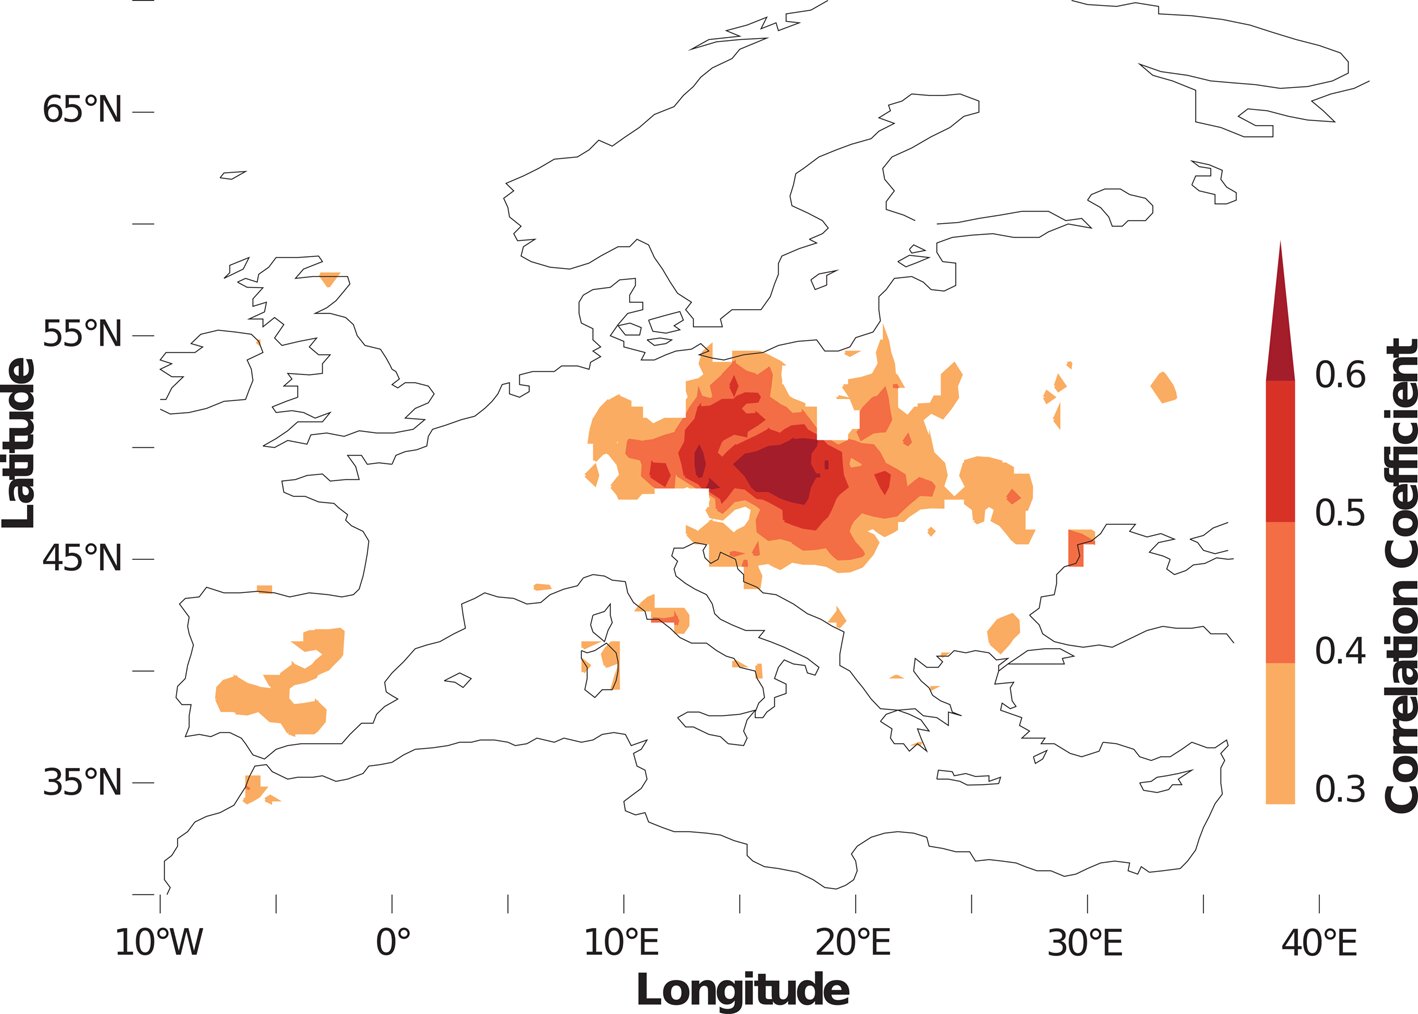 Drought encouraged Attila's Huns to attack the Roman empire, tree rings suggest